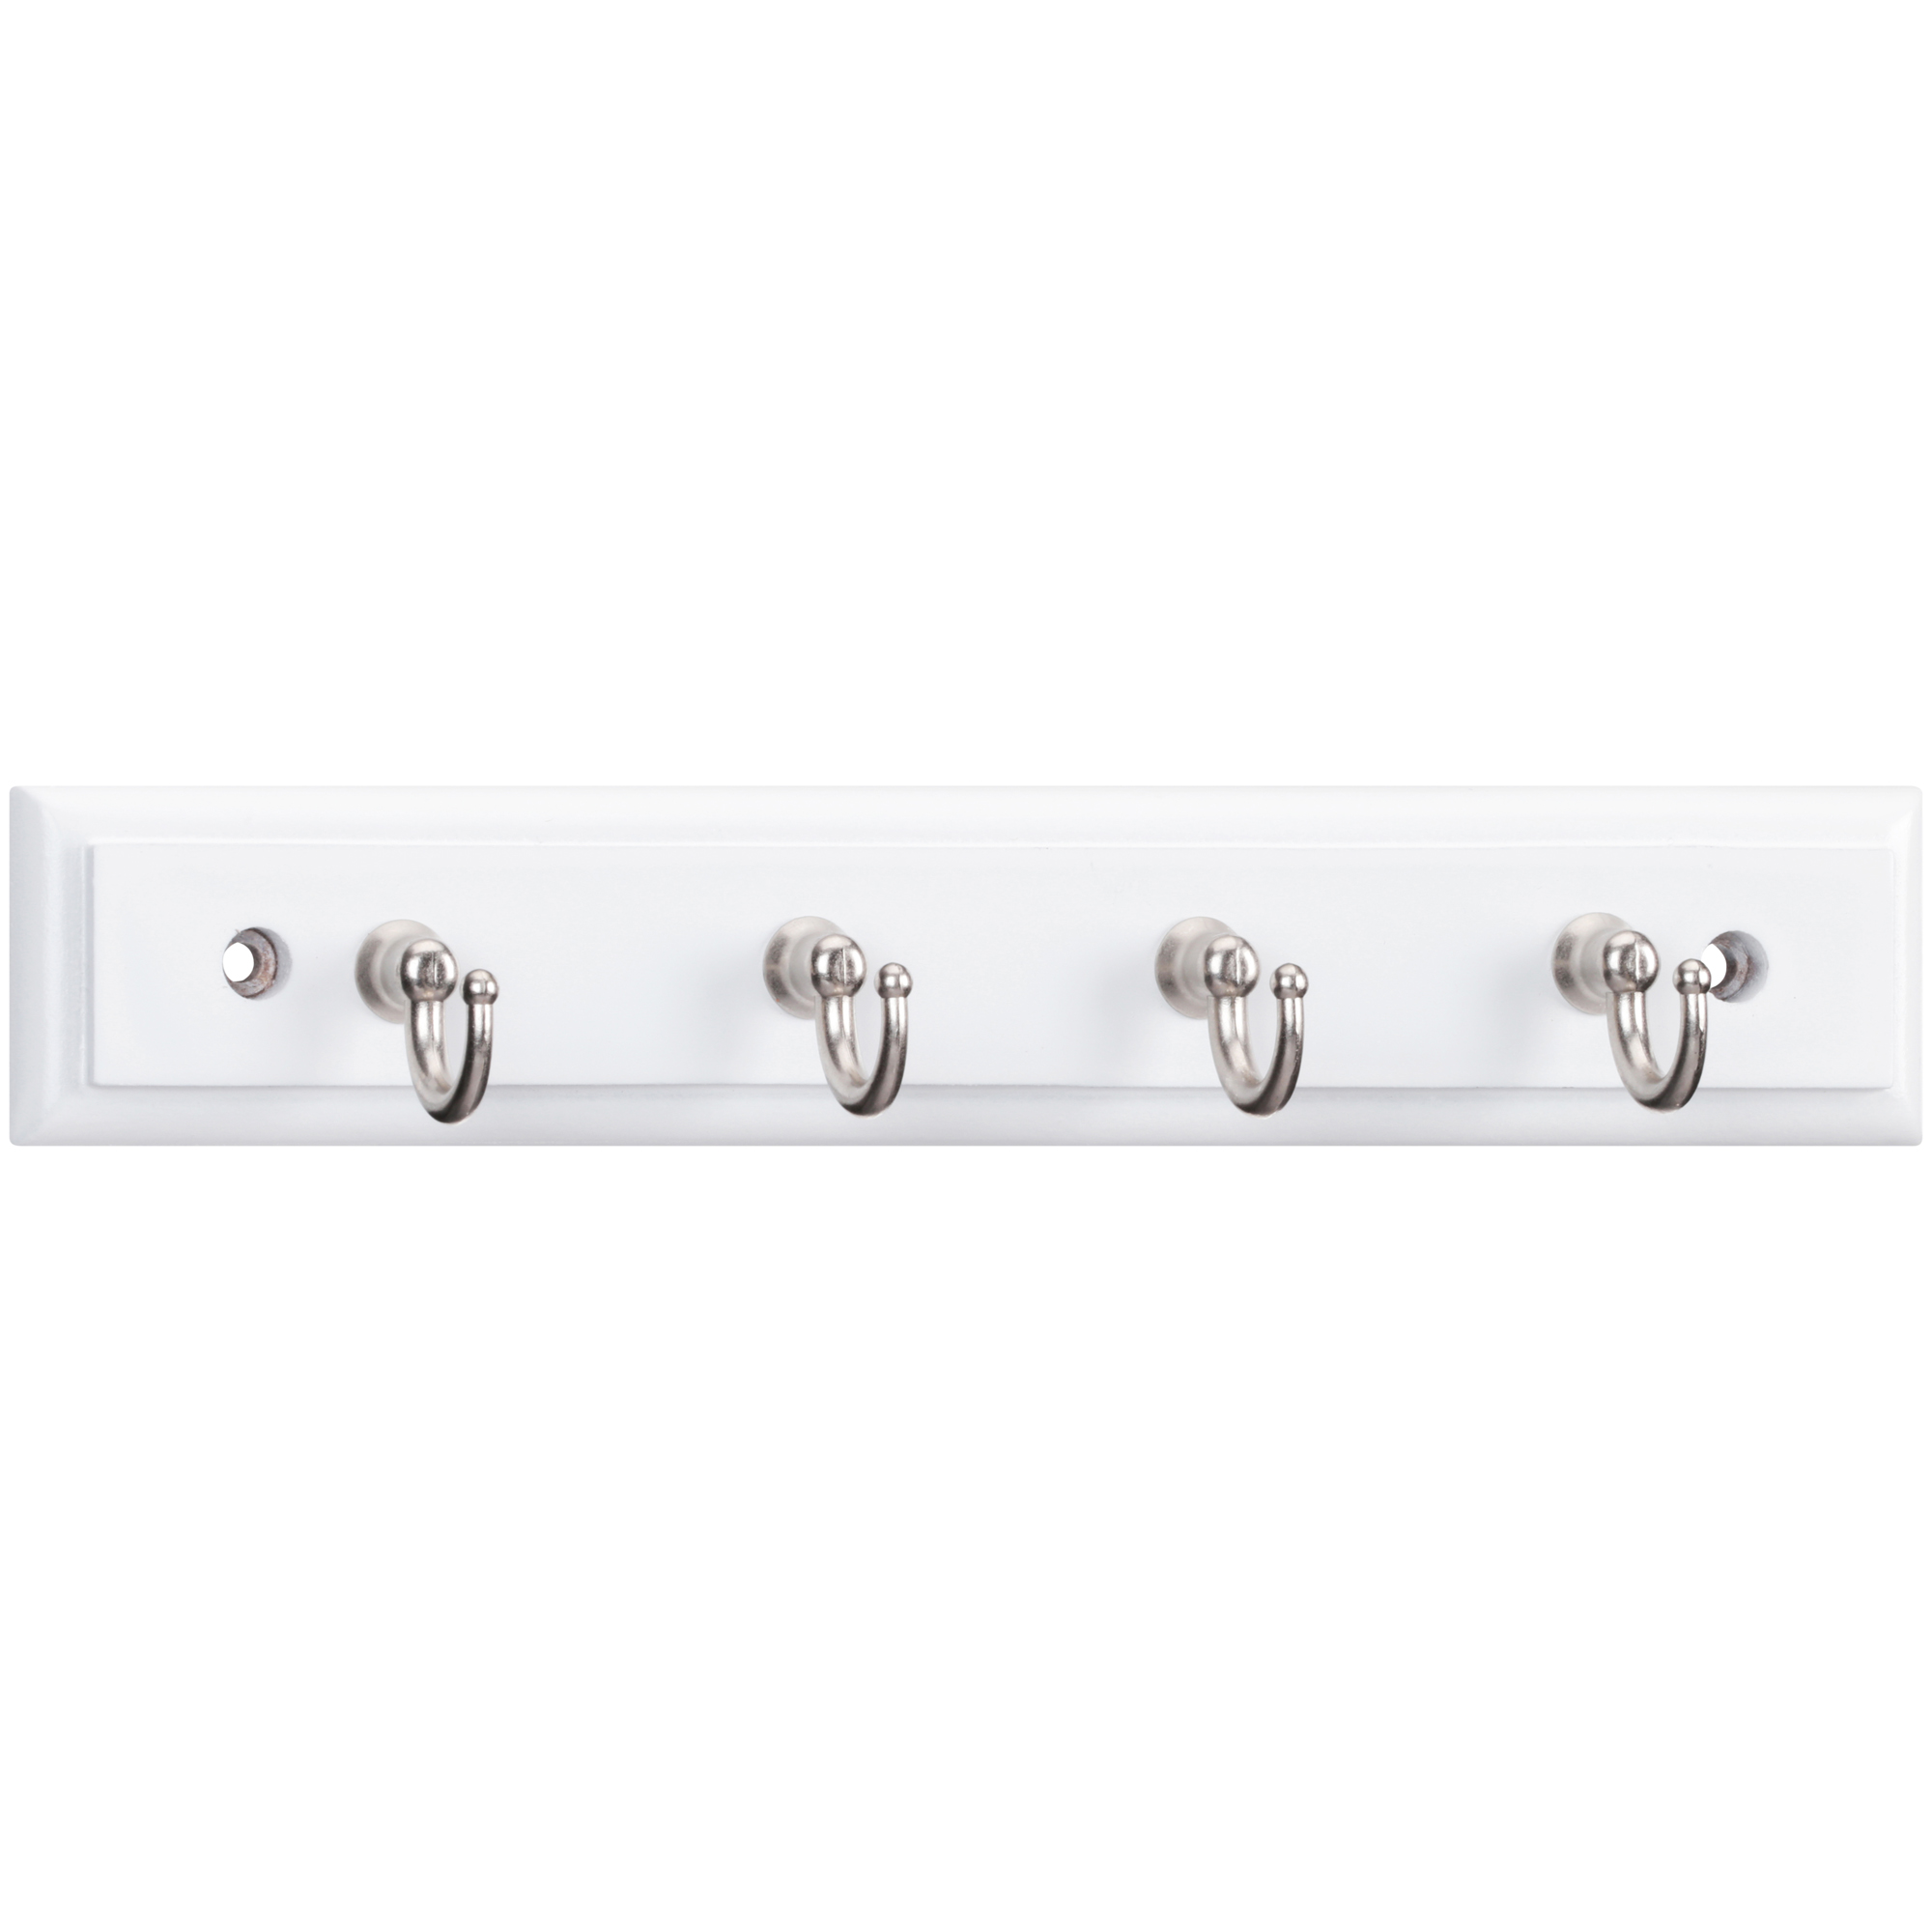 Mainstays, 8.75 Inch Key Rack, With 4 Hooks, White, Mounting Hardware Included, 2 lbs. Working Capacity - image 1 of 8